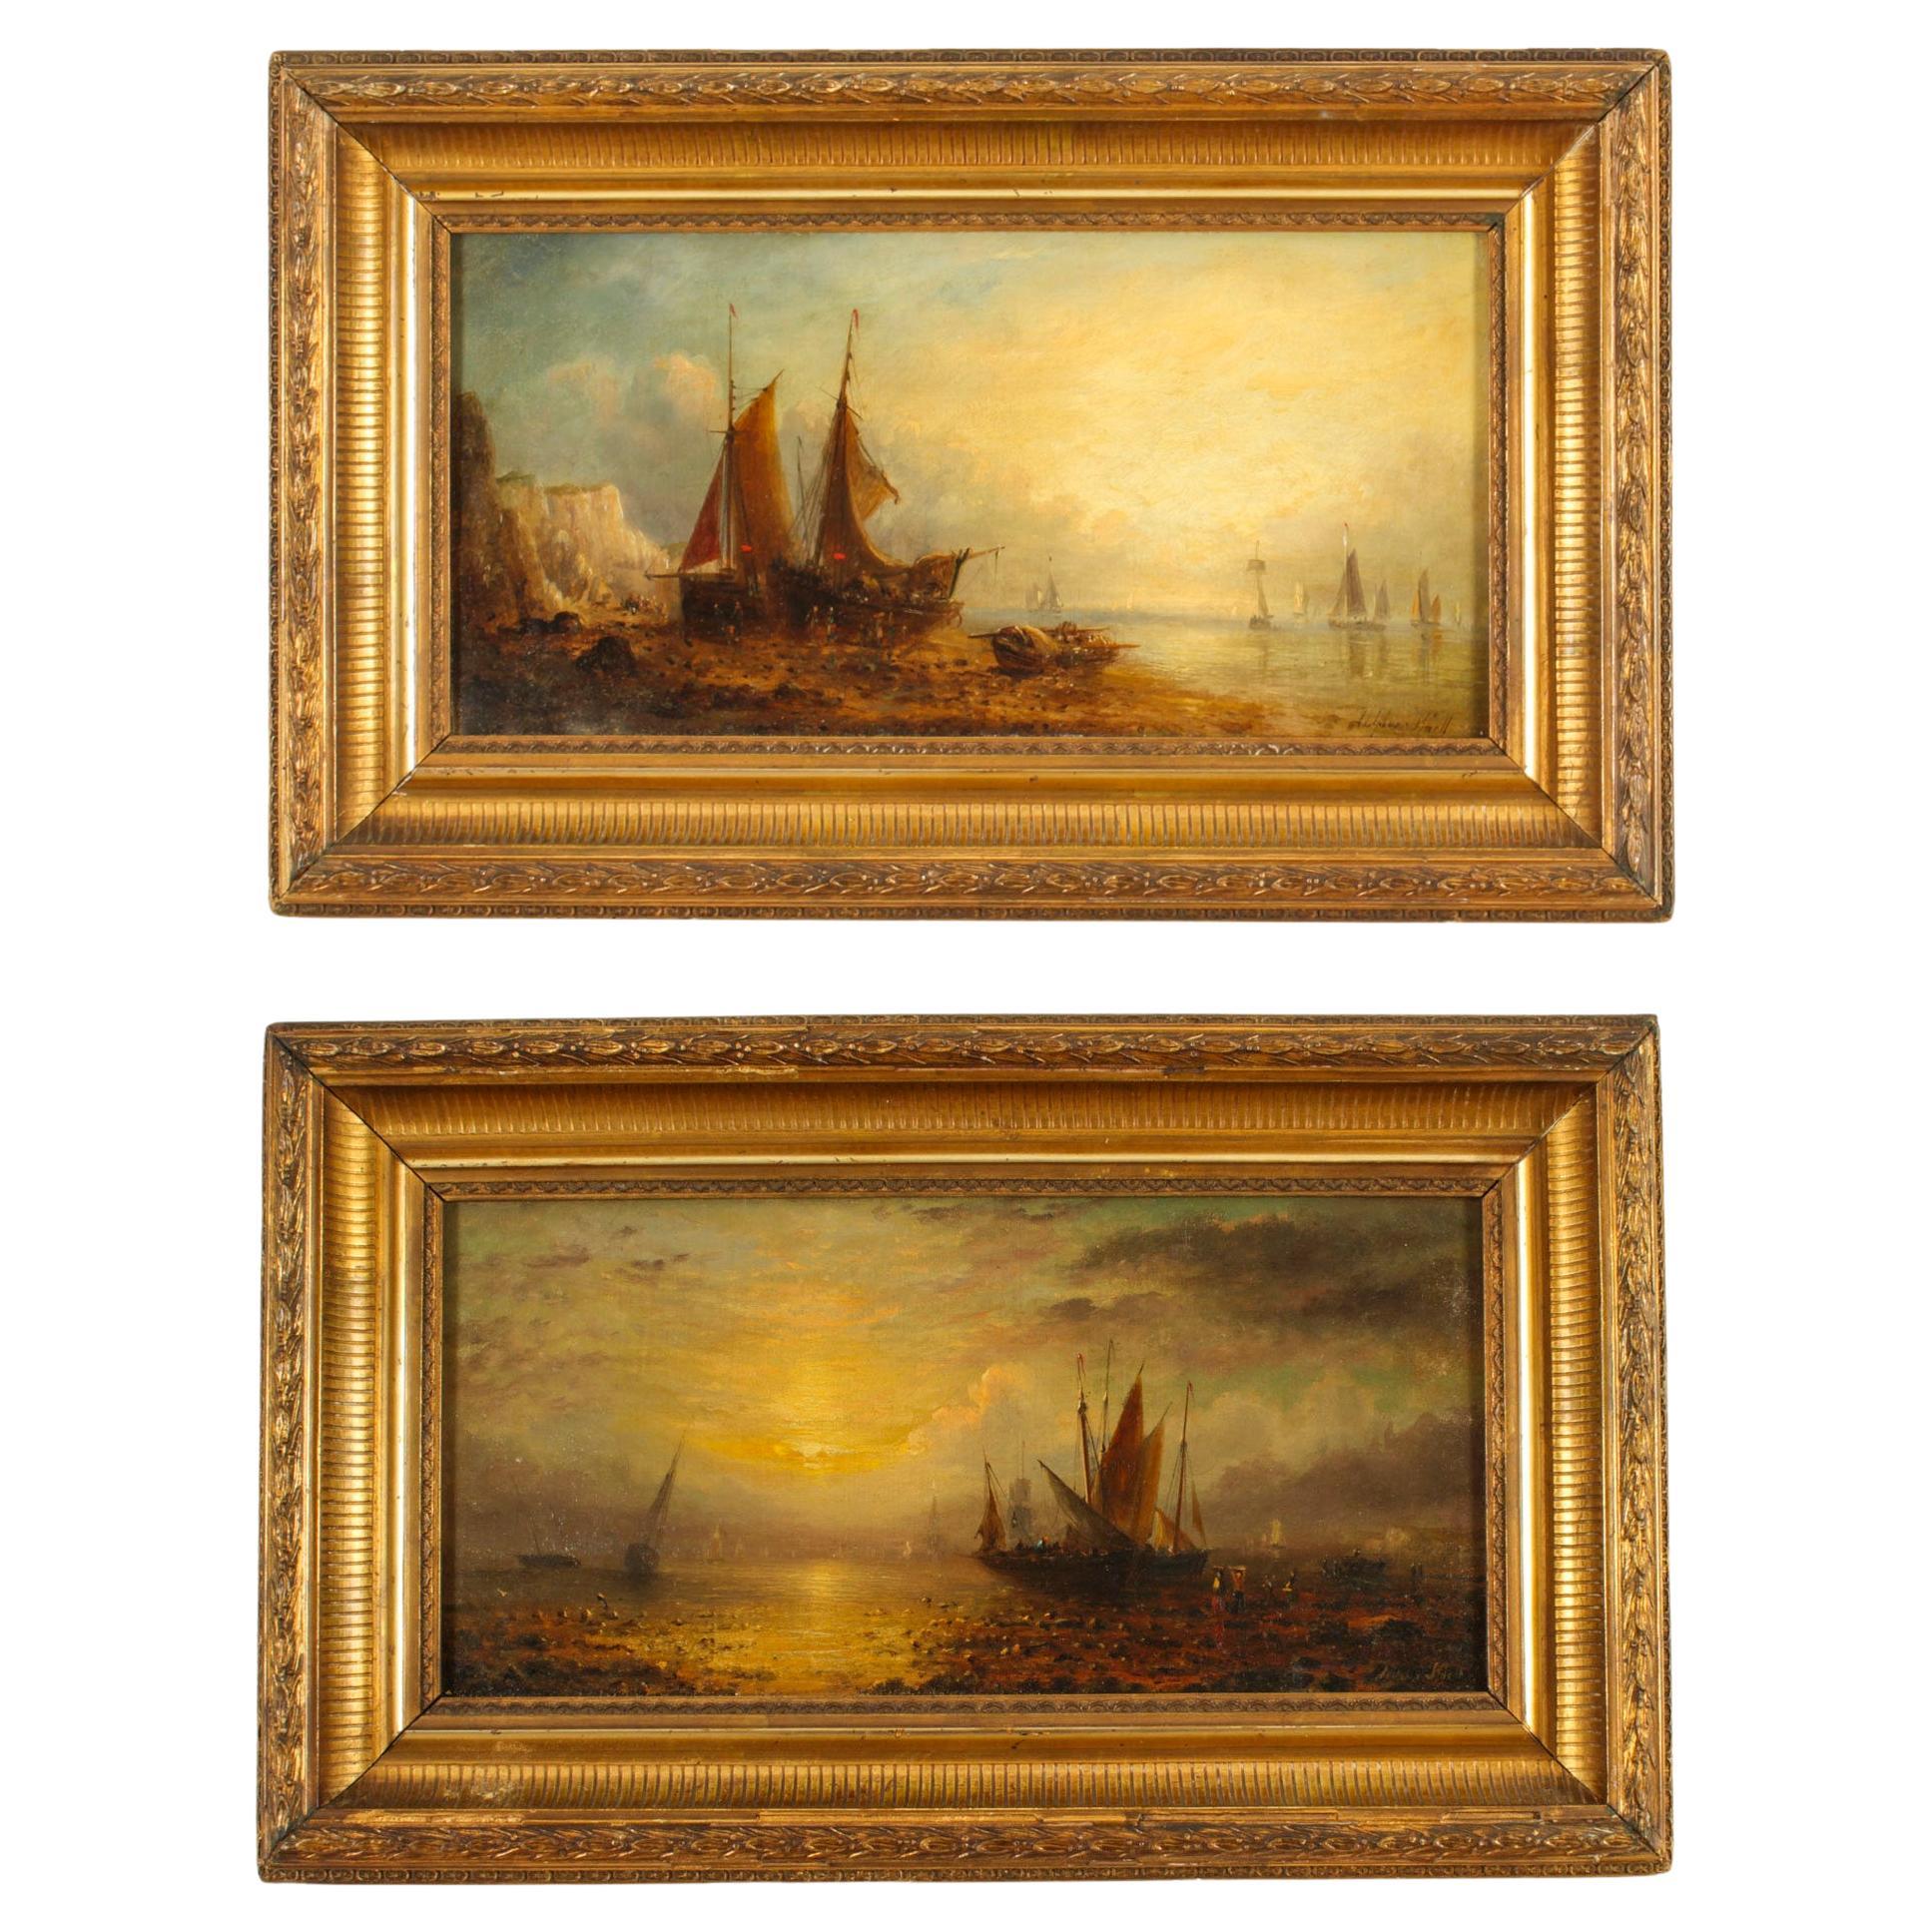 Antique Pair Waterscape Oil Paintings by William Adolphus Knell 19th C